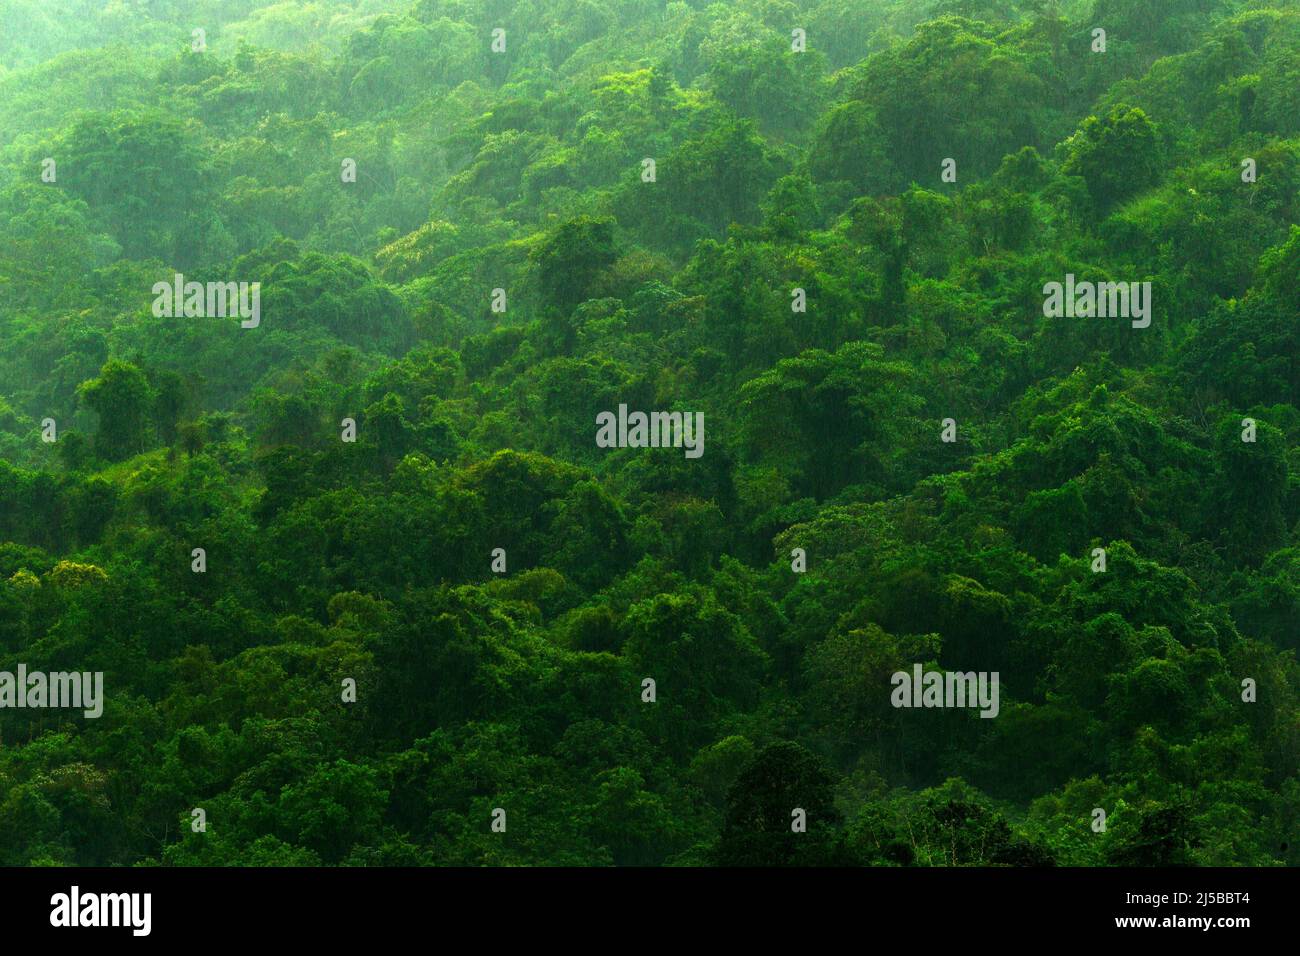 https://c8.alamy.com/comp/2J5BBT4/tropic-forest-during-rainy-day-green-jungle-landscape-with-rain-and-fog-forest-hill-with-big-beautiful-tree-in-santa-marta-colombia-green-wood-ra-2J5BBT4.jpg